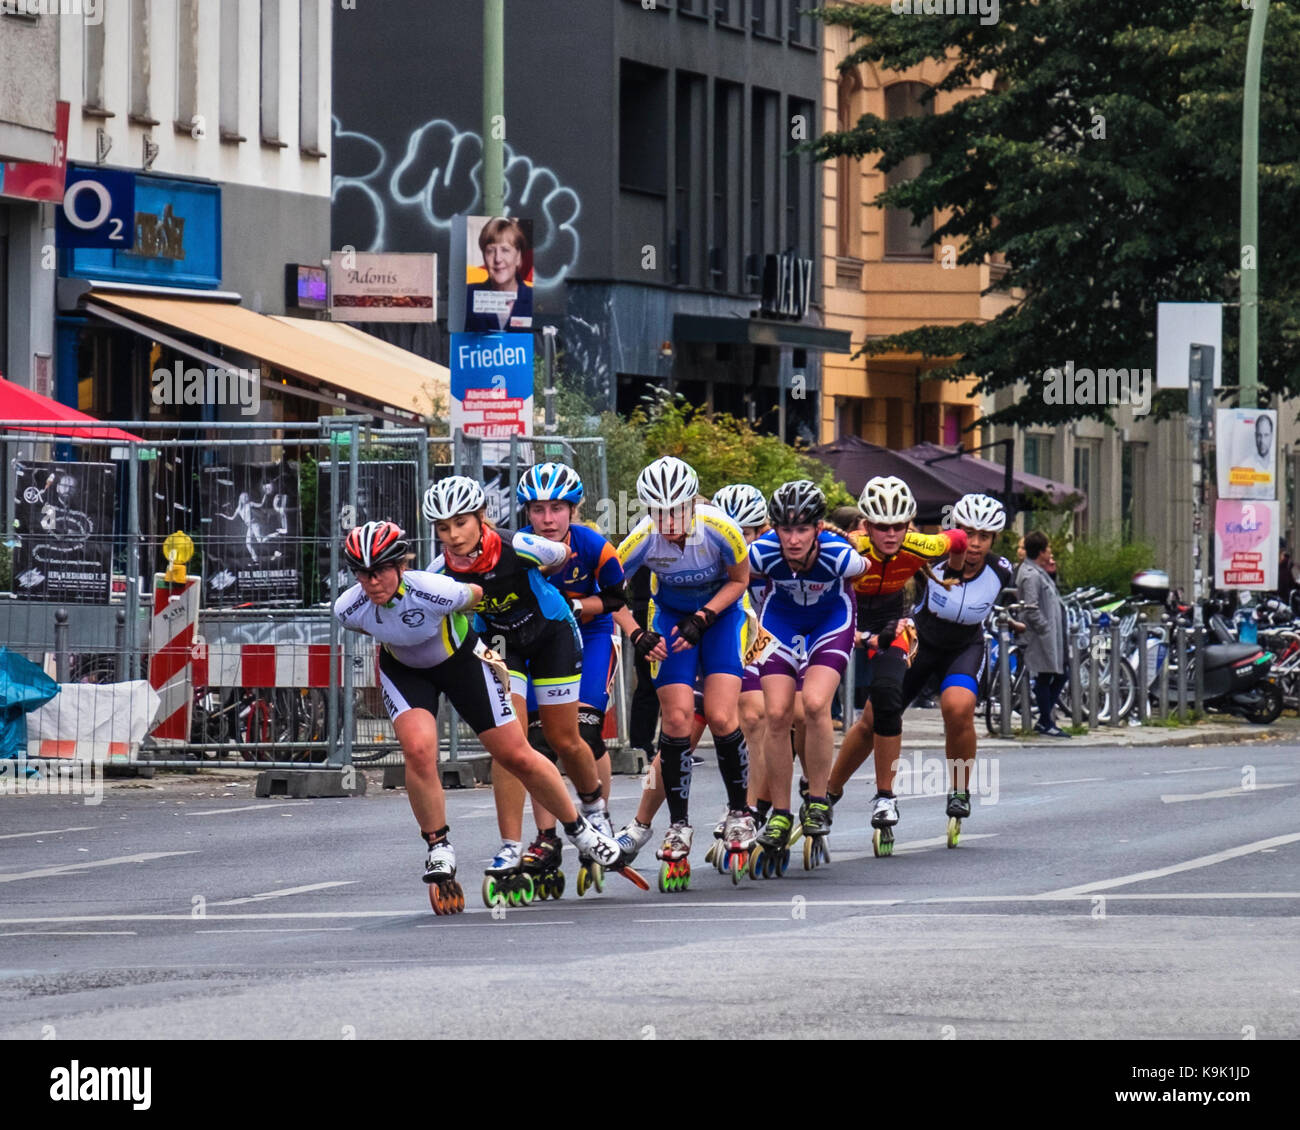 Berlin Germany. 23 September 2017, Annual In Line Skating Marathon. In line skaters pass through RosenthalePlatz as they compete in the annual roller skating event. Eden Breitz/Alamy Live News Stock Photo